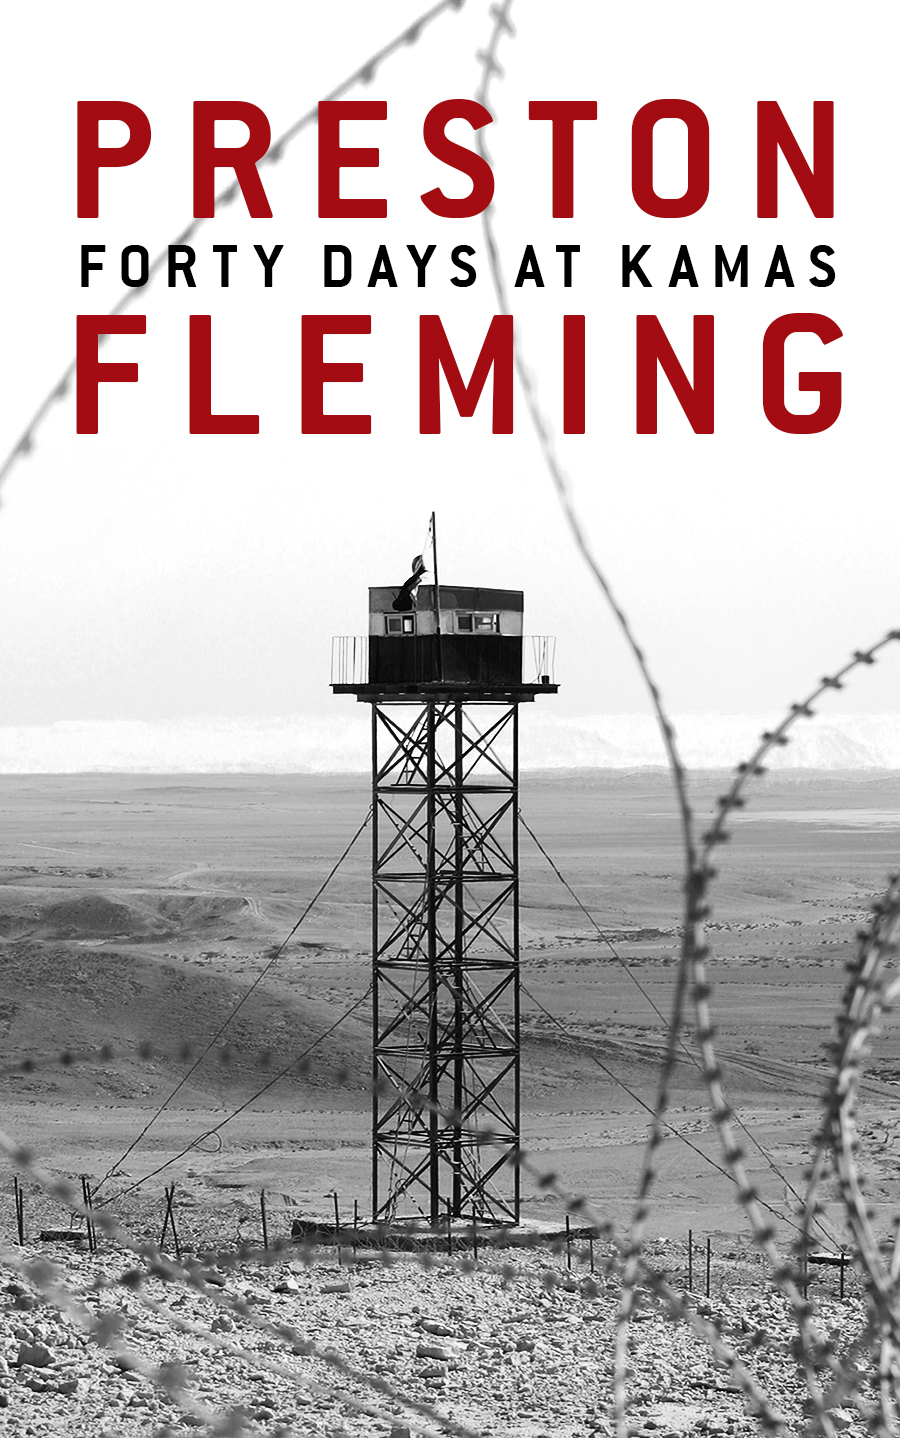 FREE: Forty Days at Kamas by Preston Fleming